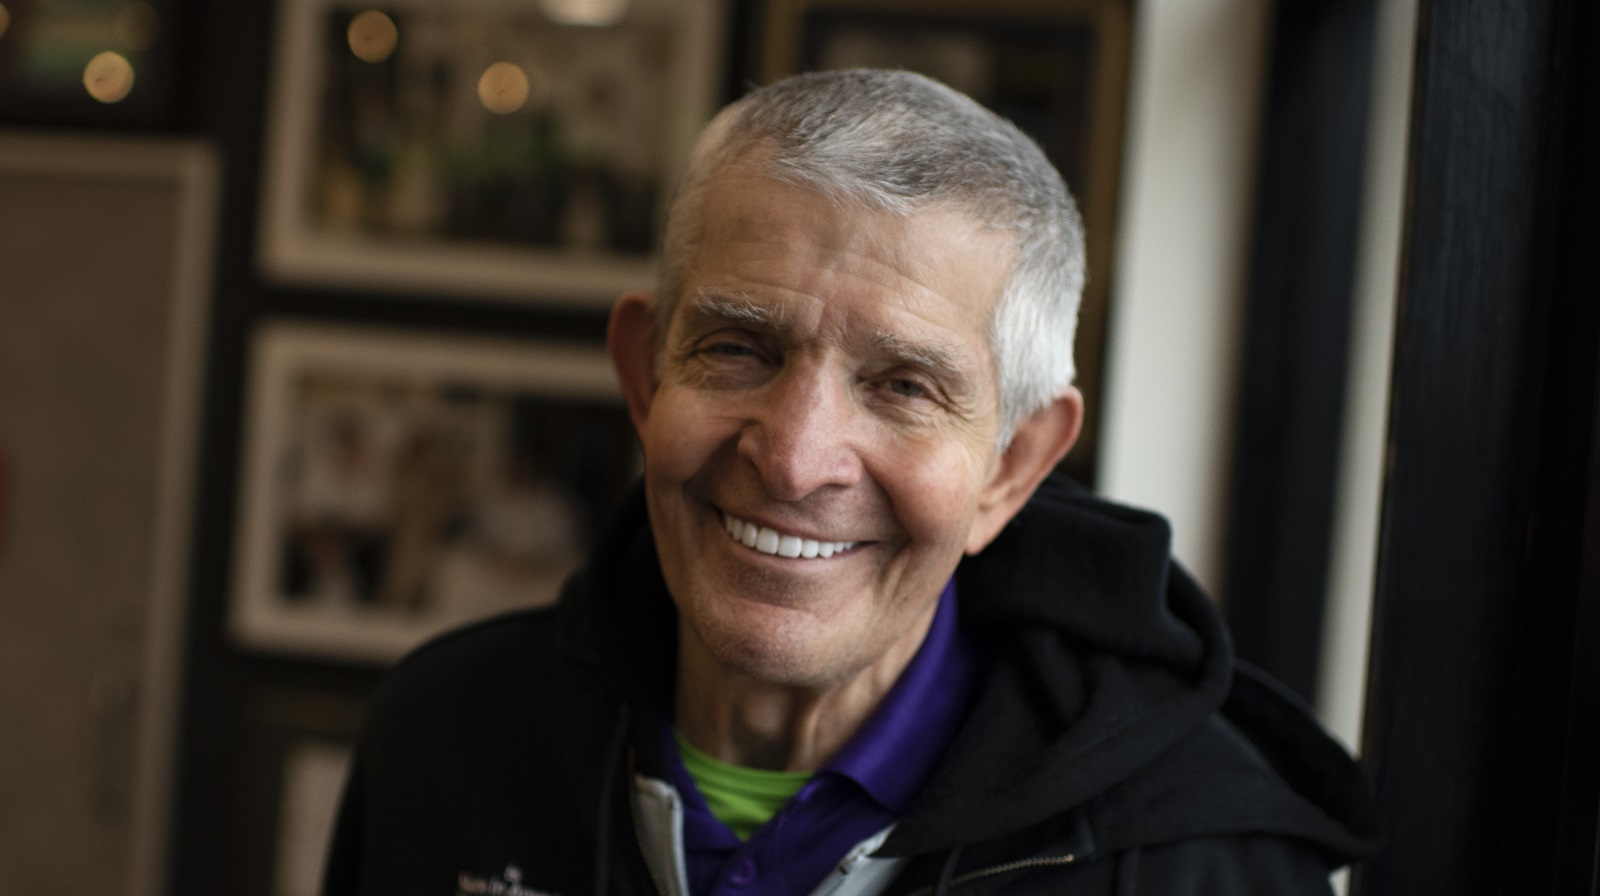 Mattress Mack’s $4 Million World Series Bet Means a 20% Haircut or Worse for the Rest of Us